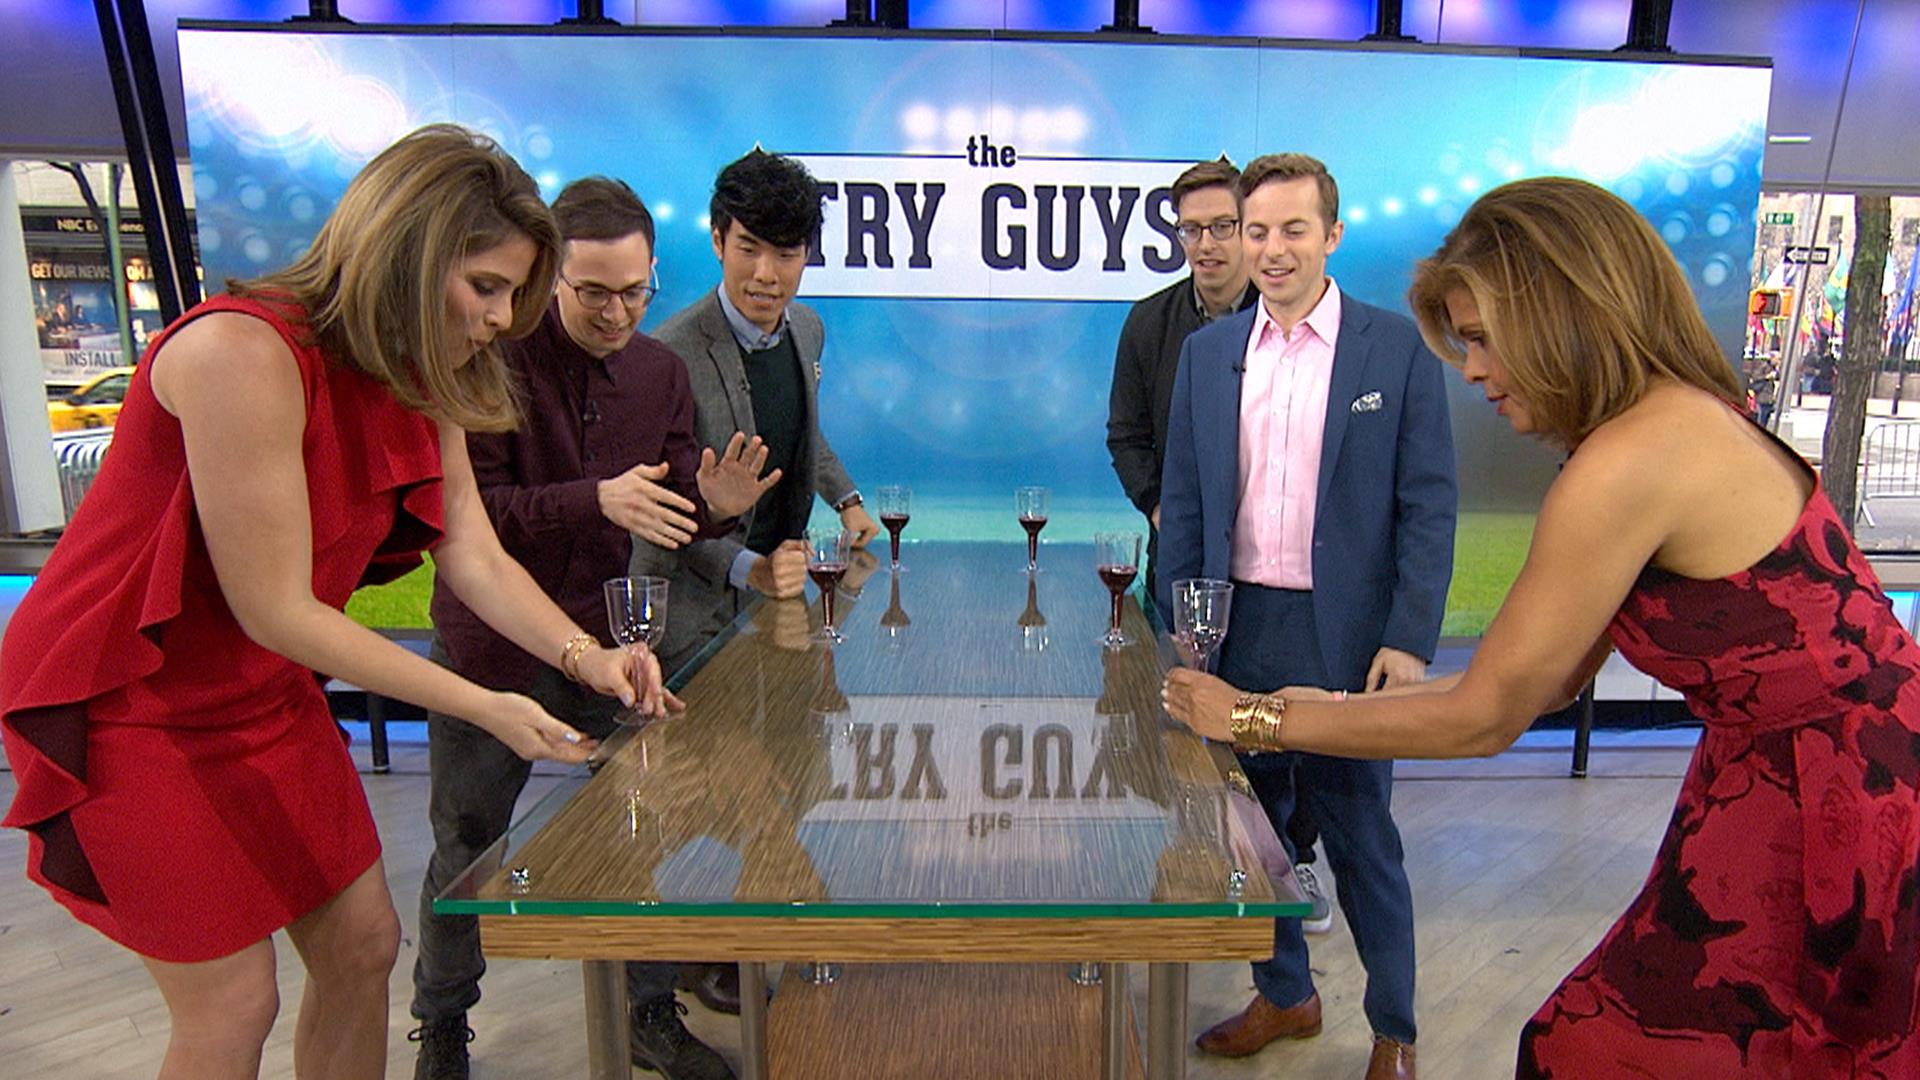 Watch BuzzFeed's Try Guys play flip cup with Hoda and Jenna